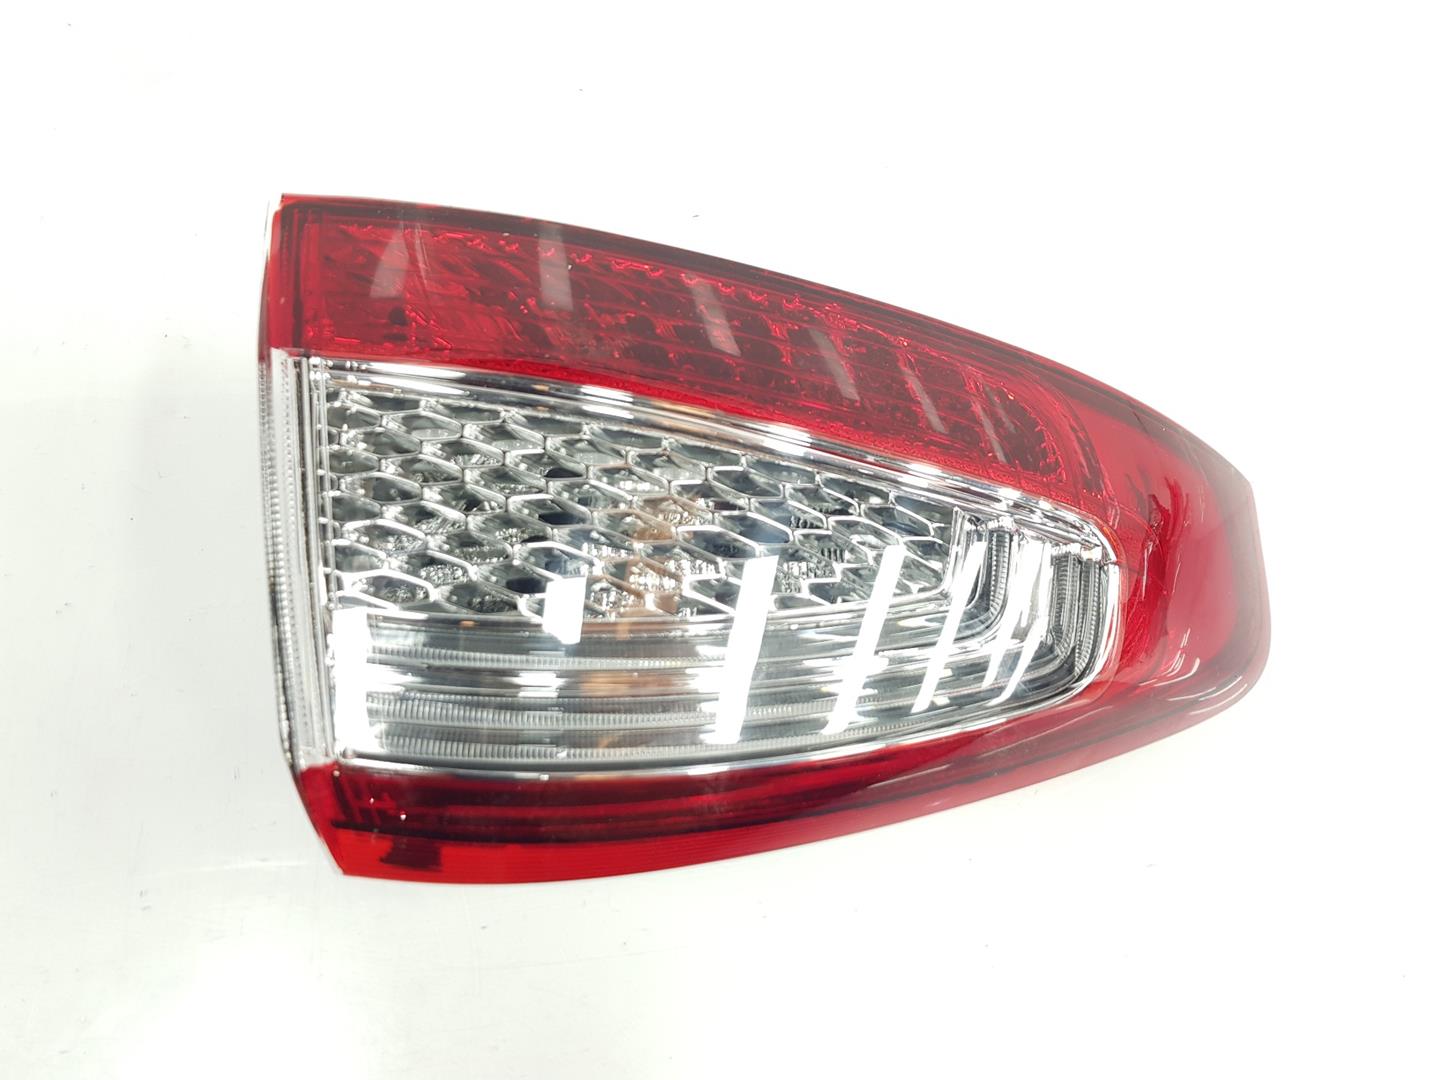 FORD Mondeo 4 generation (2007-2015) Rear Left Taillight 7S7113A603A, DEPO084311998L 19934418